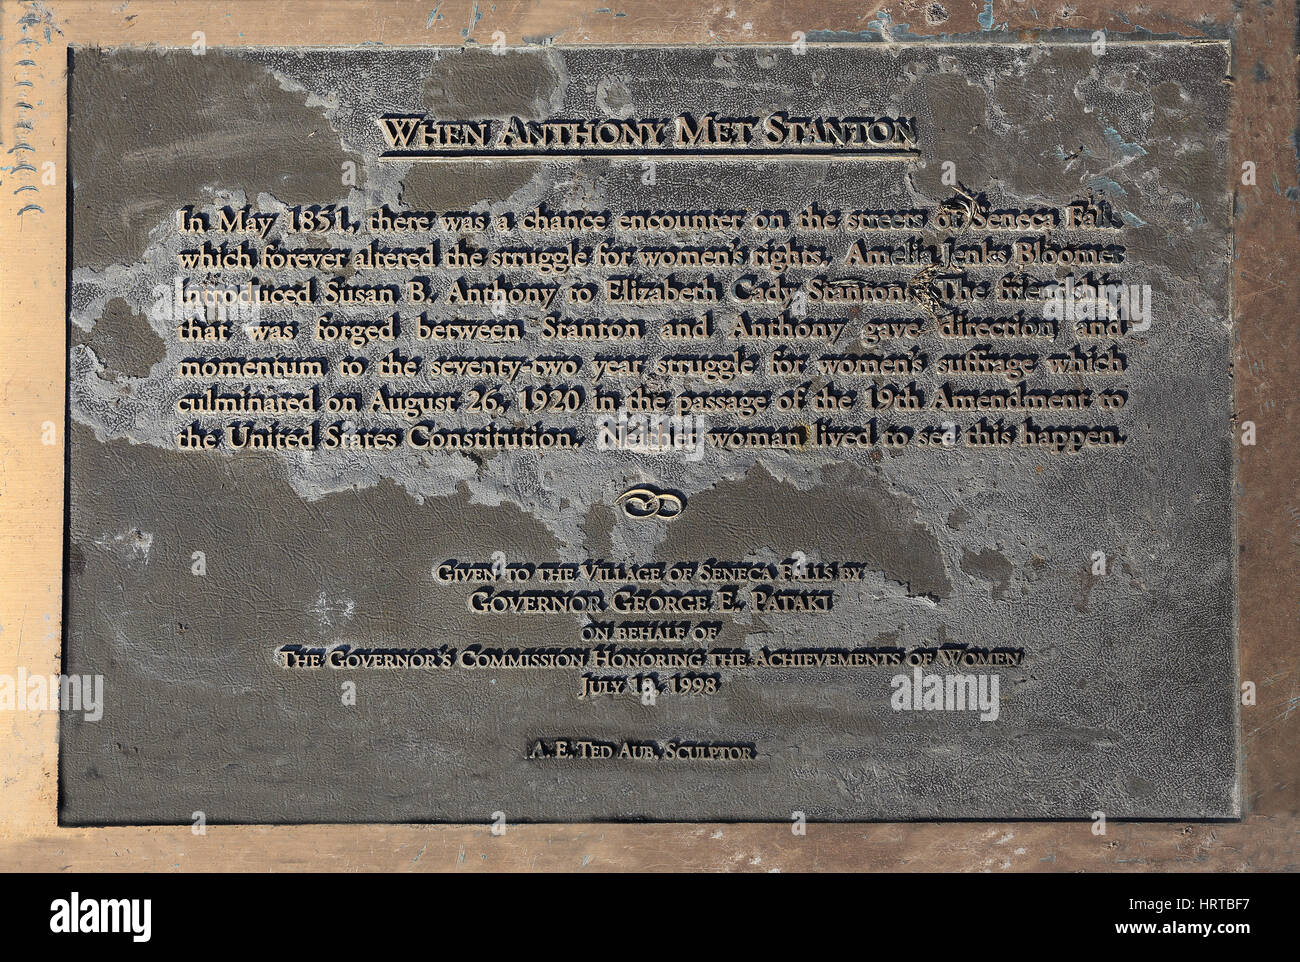 Plaque at sculpture depicting May 1851 chance meeting of Elizabeth Caty Stanton and Susan B. Anthony Seneca Falls New York birthplace of the women's r Stock Photo